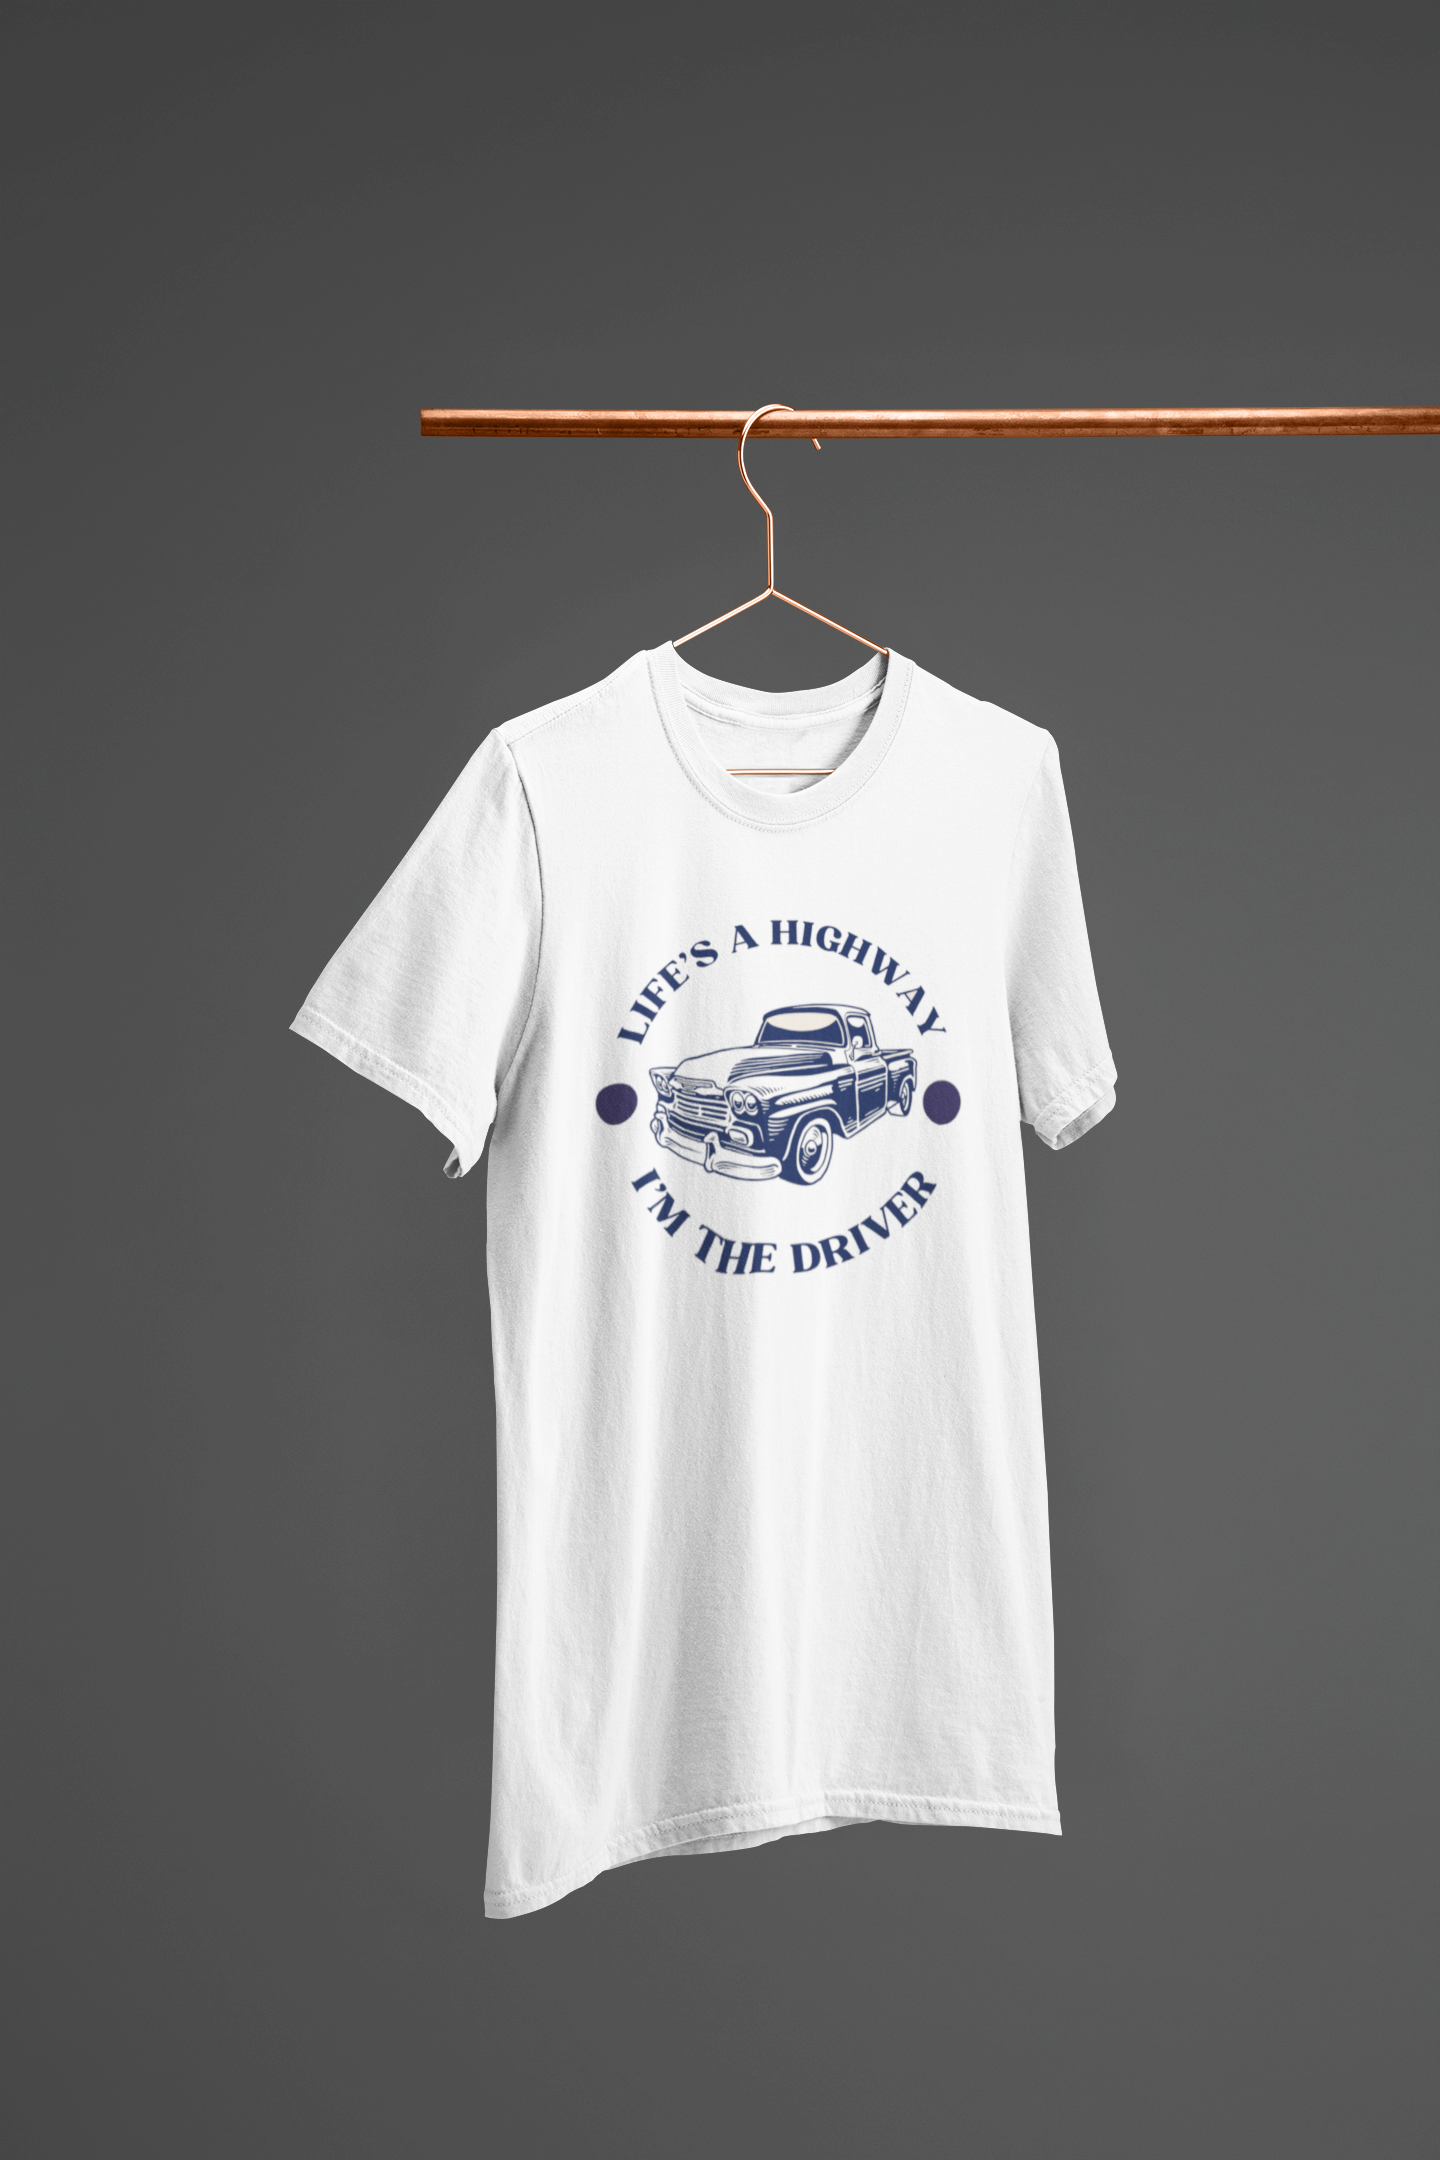 LIFE IS A HIGHWAY I'M THE DRIVER 100% Cotton T-Shirt